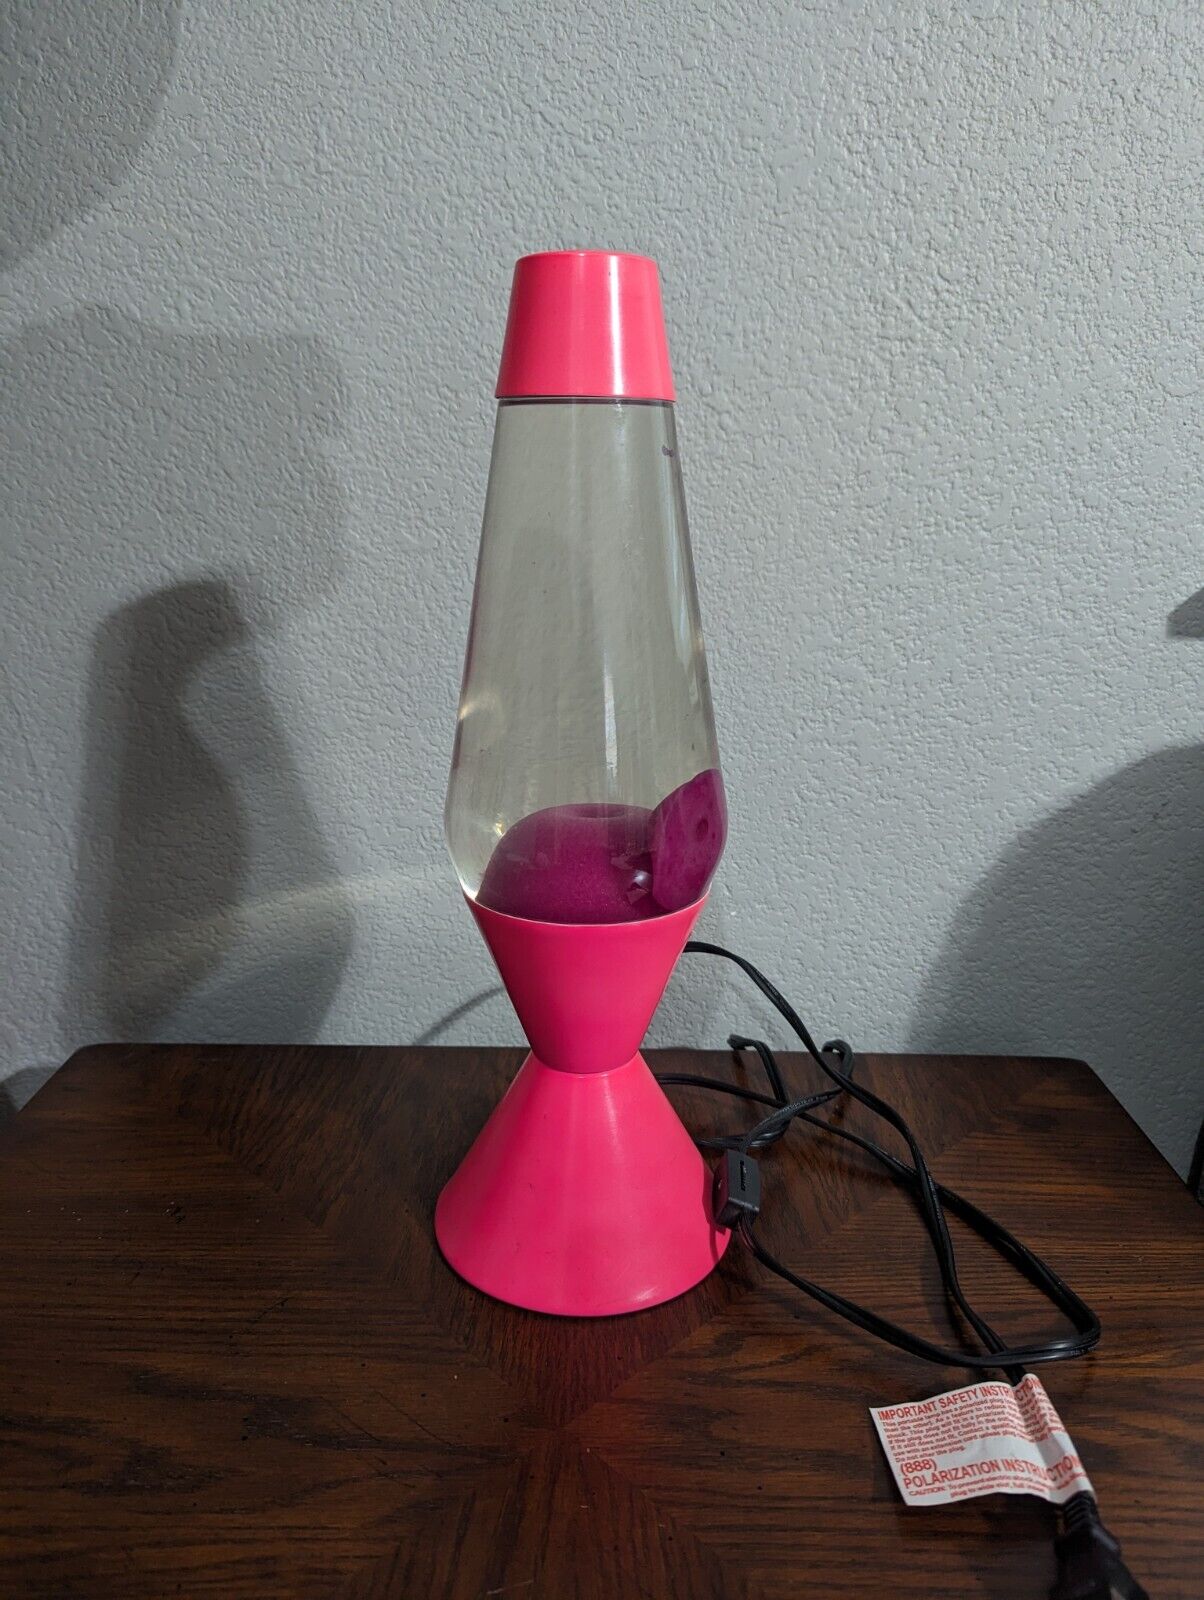 Motion and Glitter Lava Lamp - Model 5200 - 16” Tall - Hot Pink/Pink